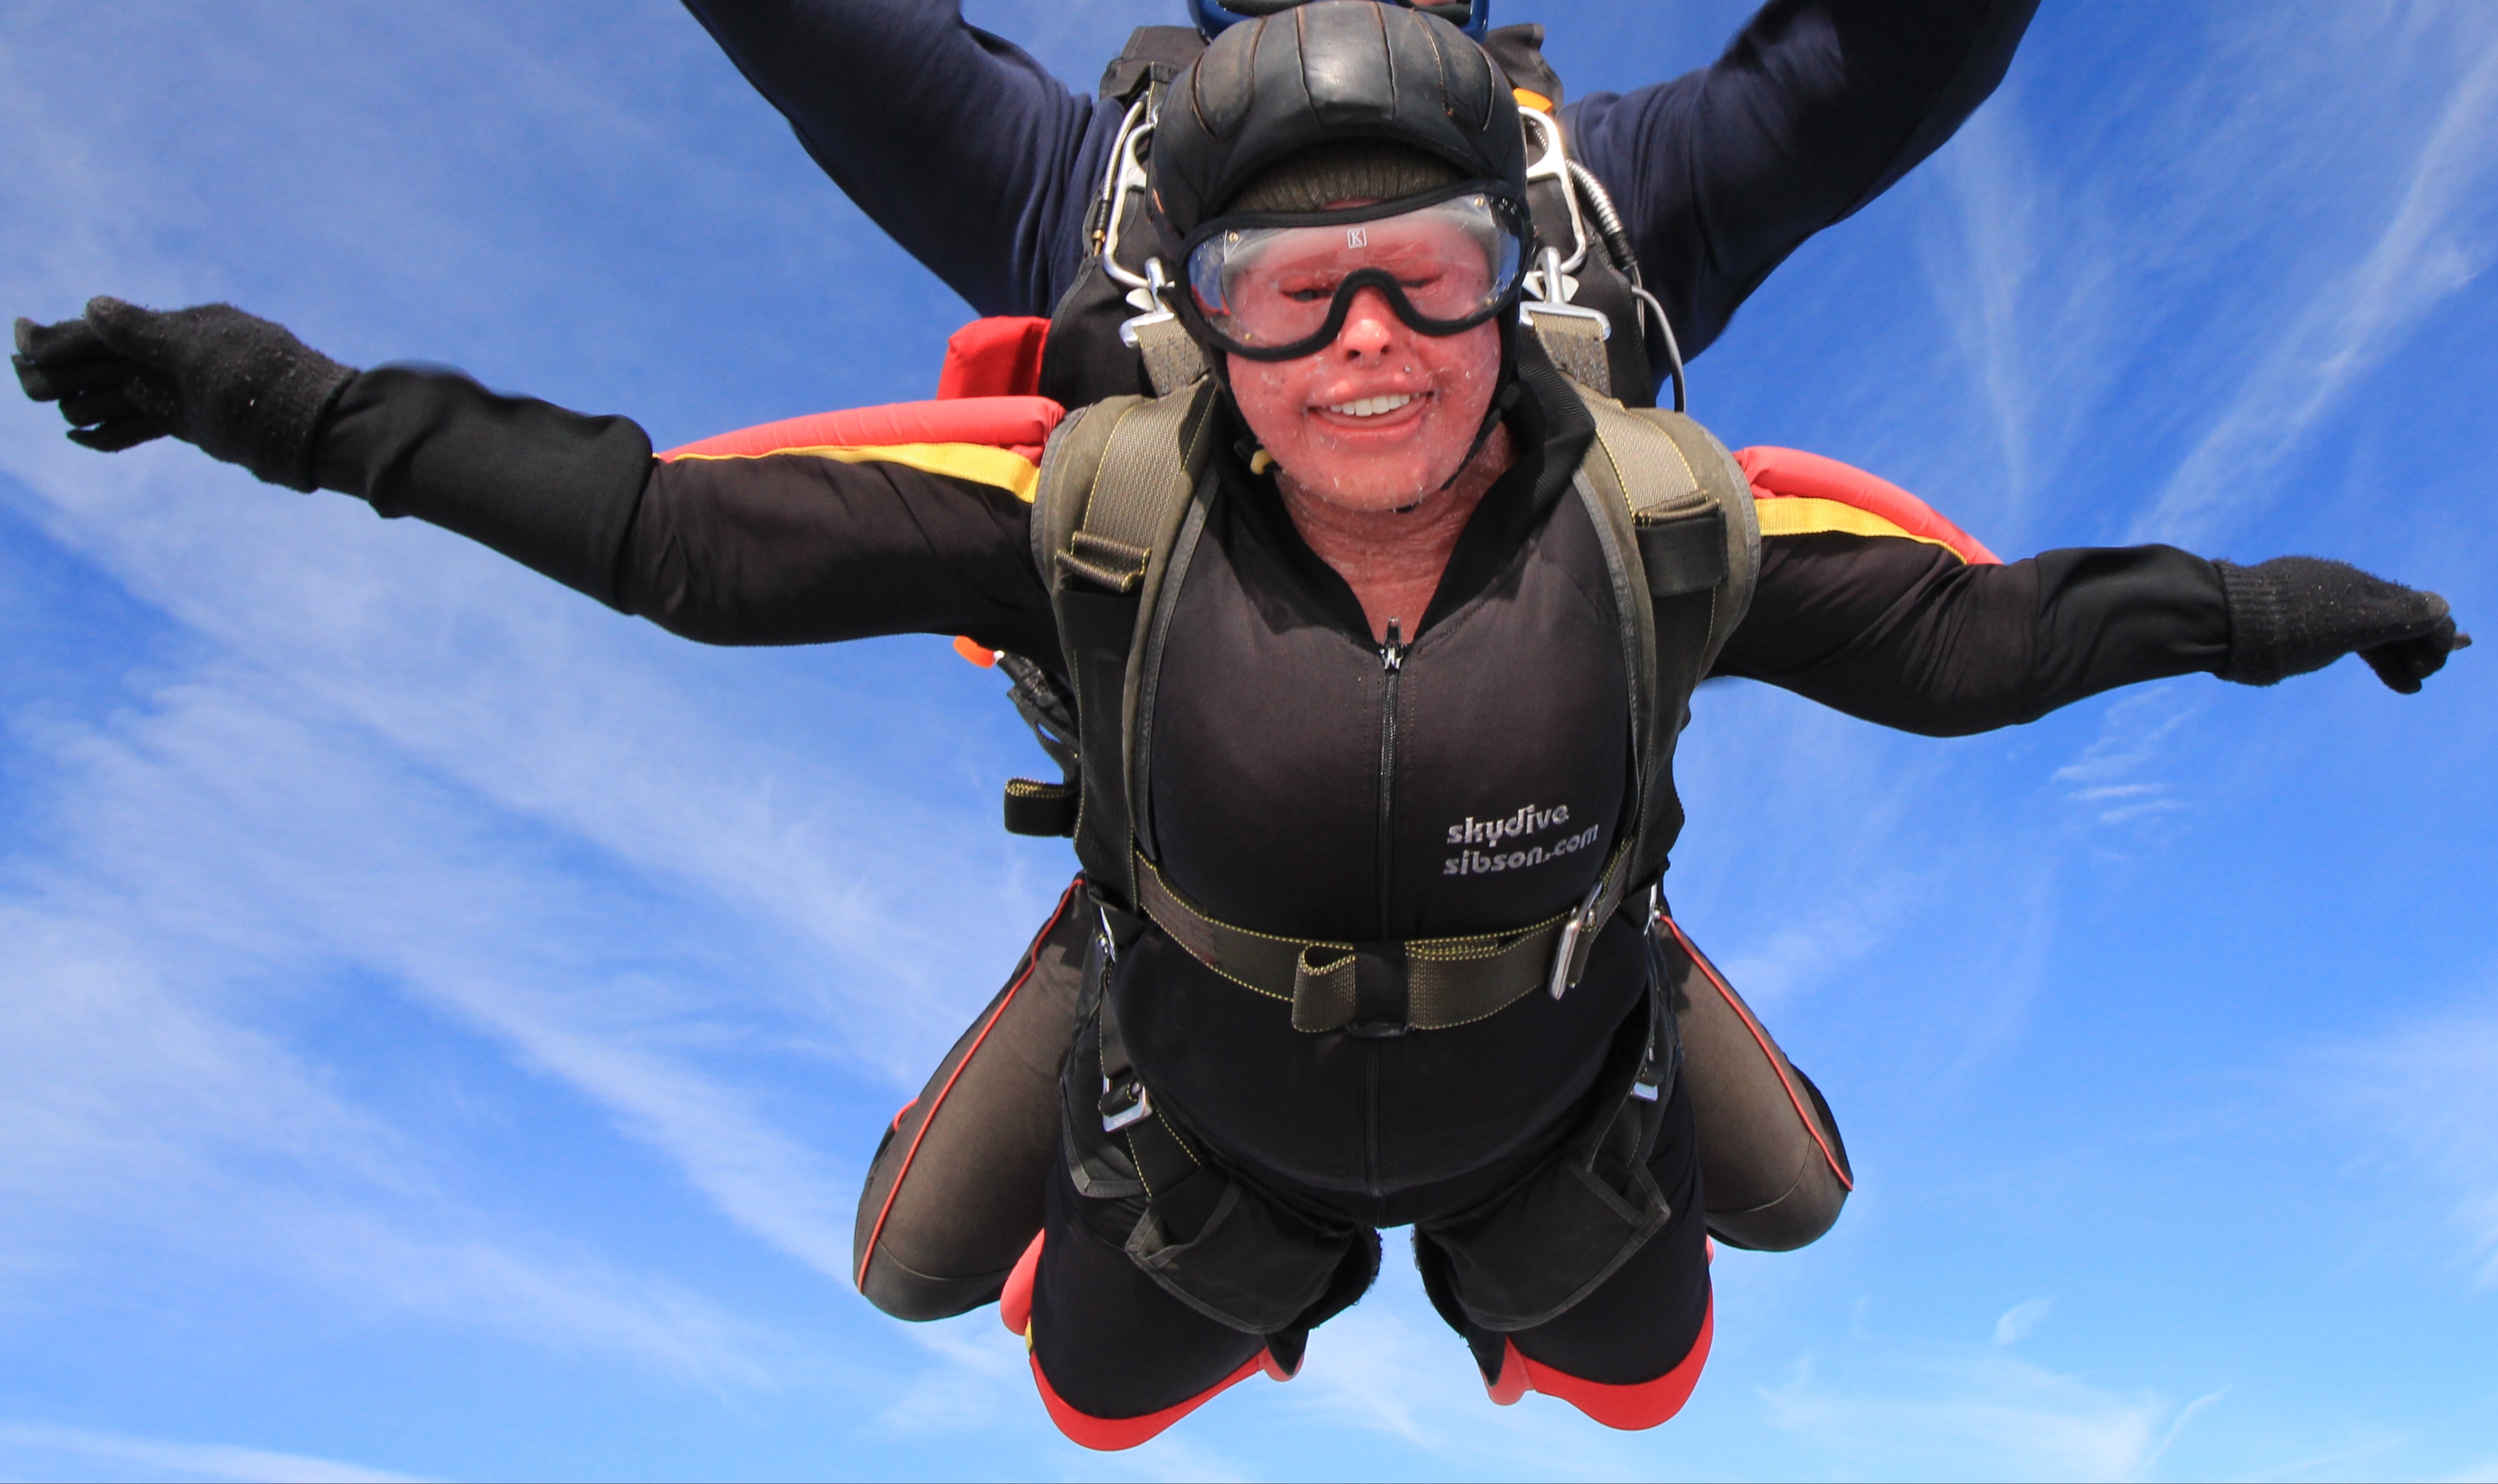 Nusrit (Nelly) Shaheen from Coventry has harlequin ichthyosis. Nelly believes in living life to the fullest. This photograph was taken during a skydive that she performed for charity in 2017.  Acknowledgement: Nusrit Shaheen.